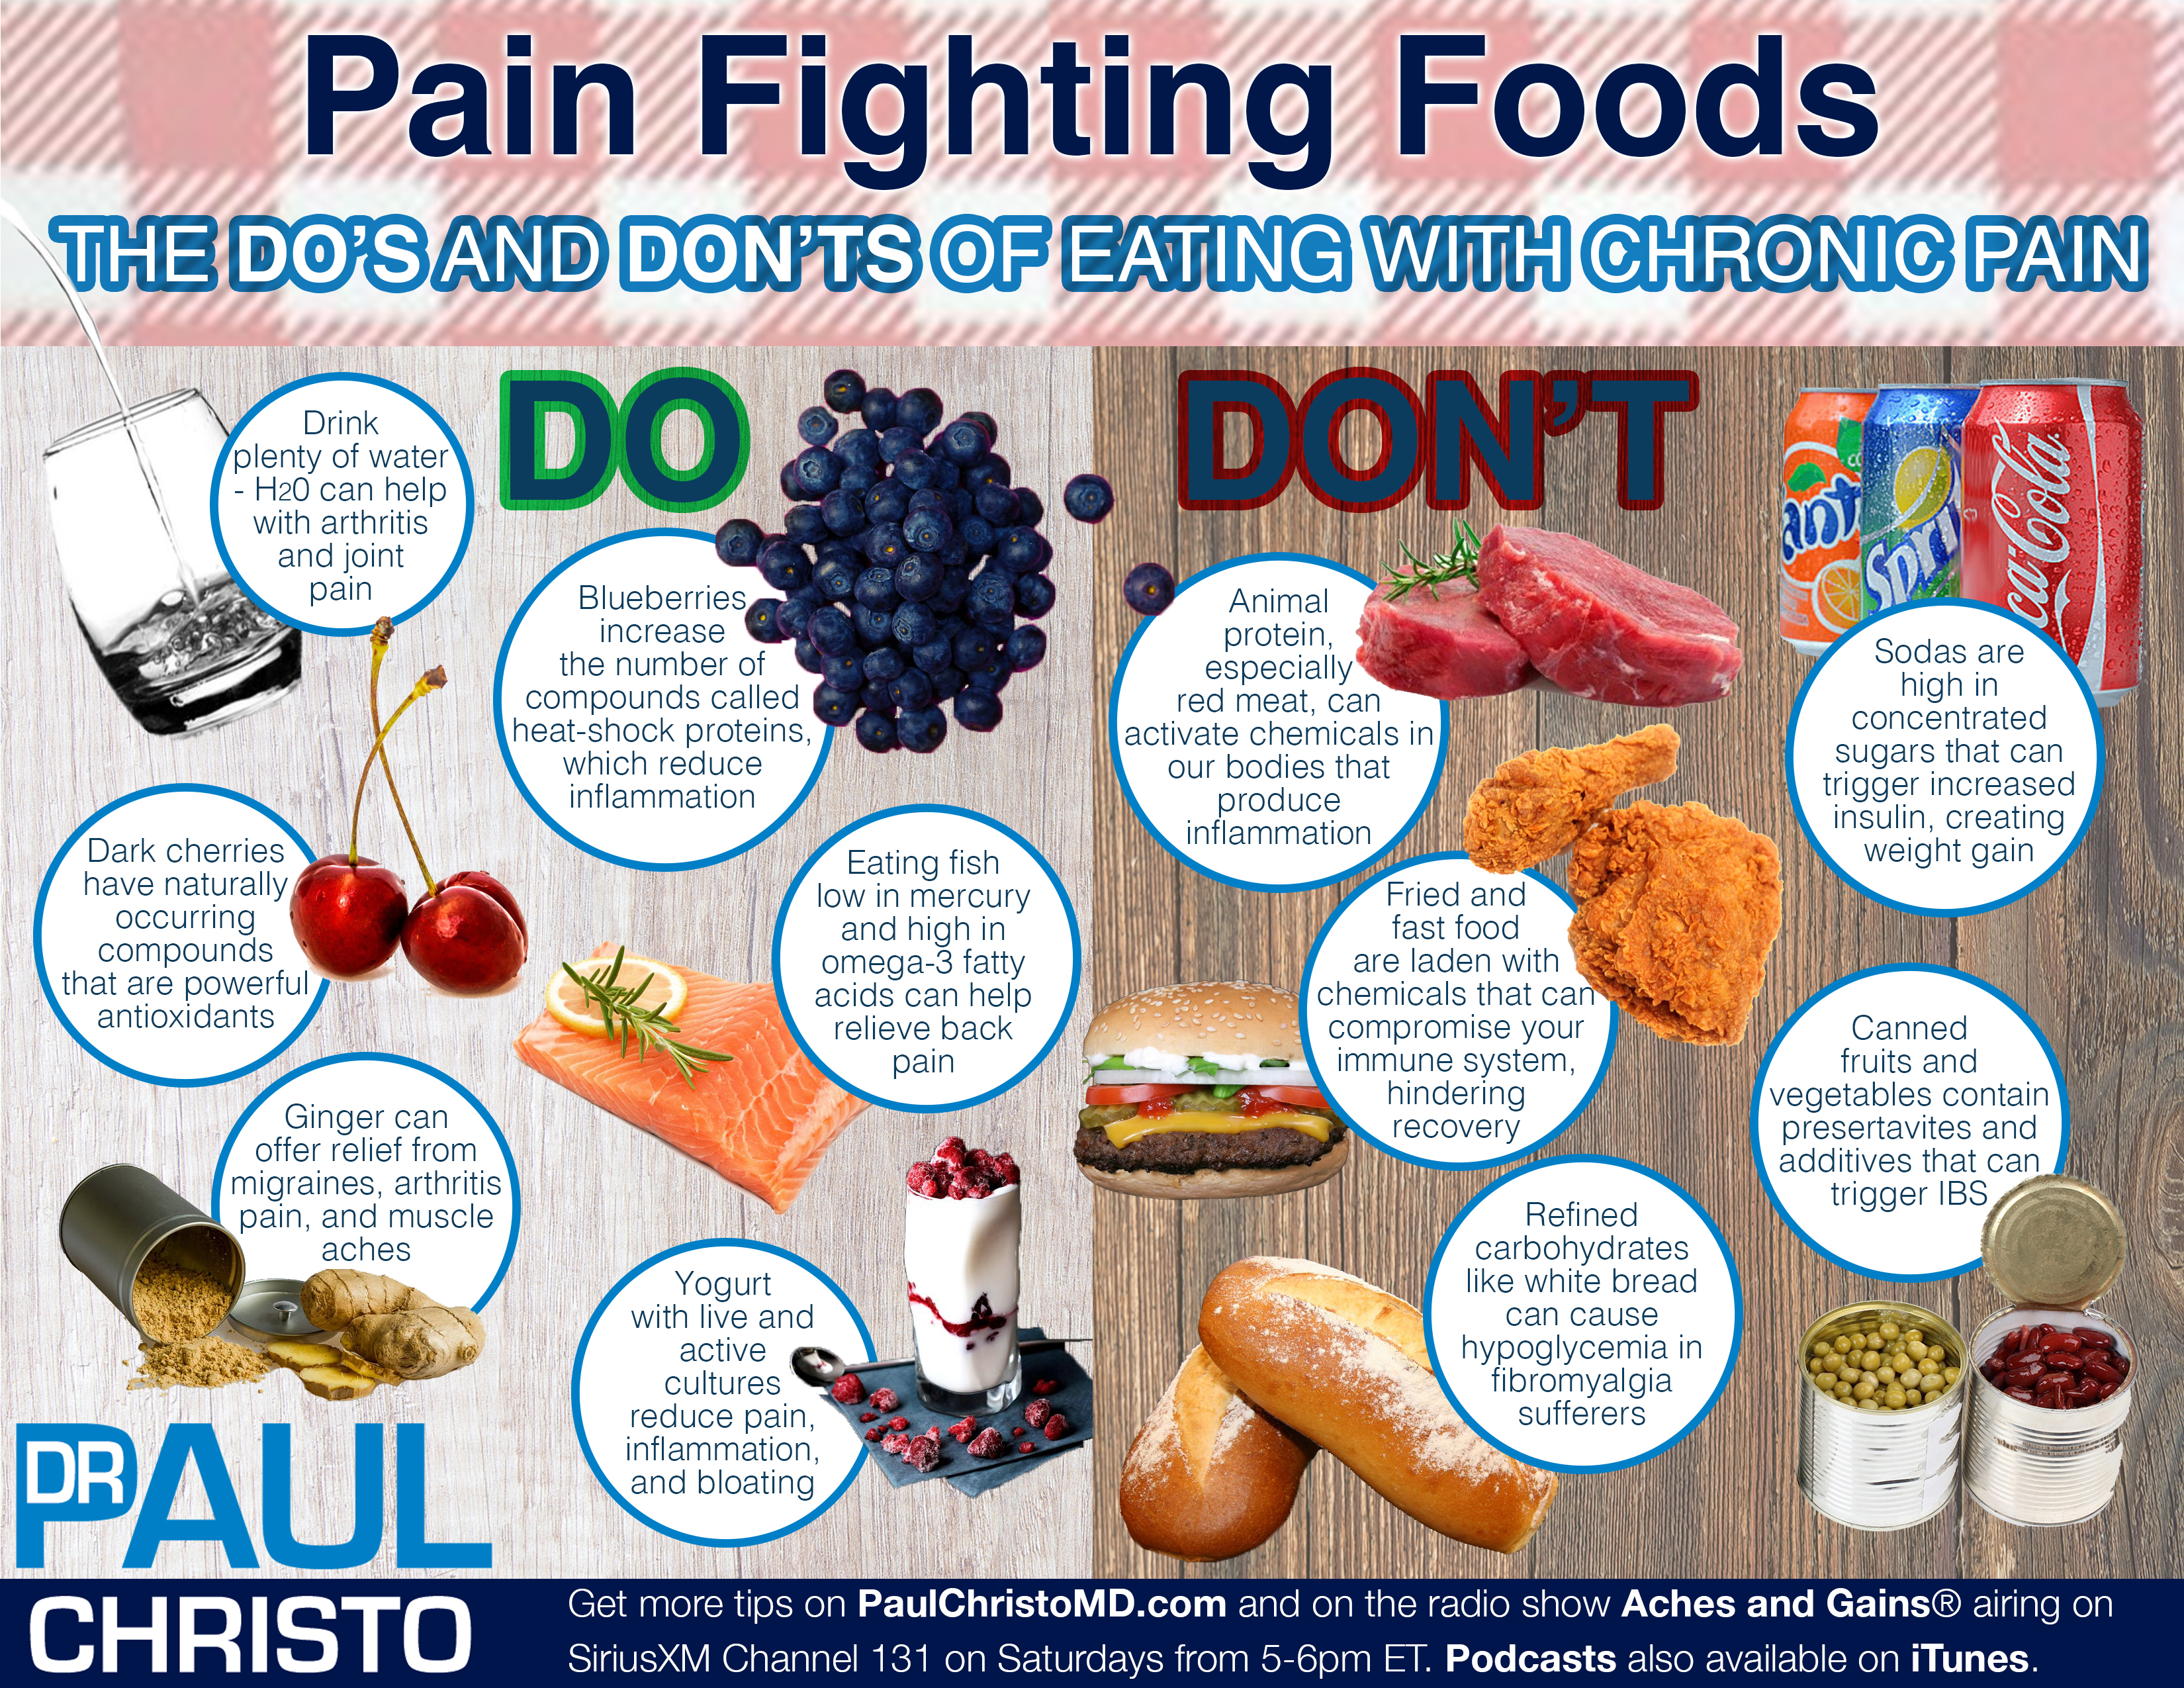 [FREE DOWNLOAD] The Do’s and Don’ts of Eating with Chronic Pain